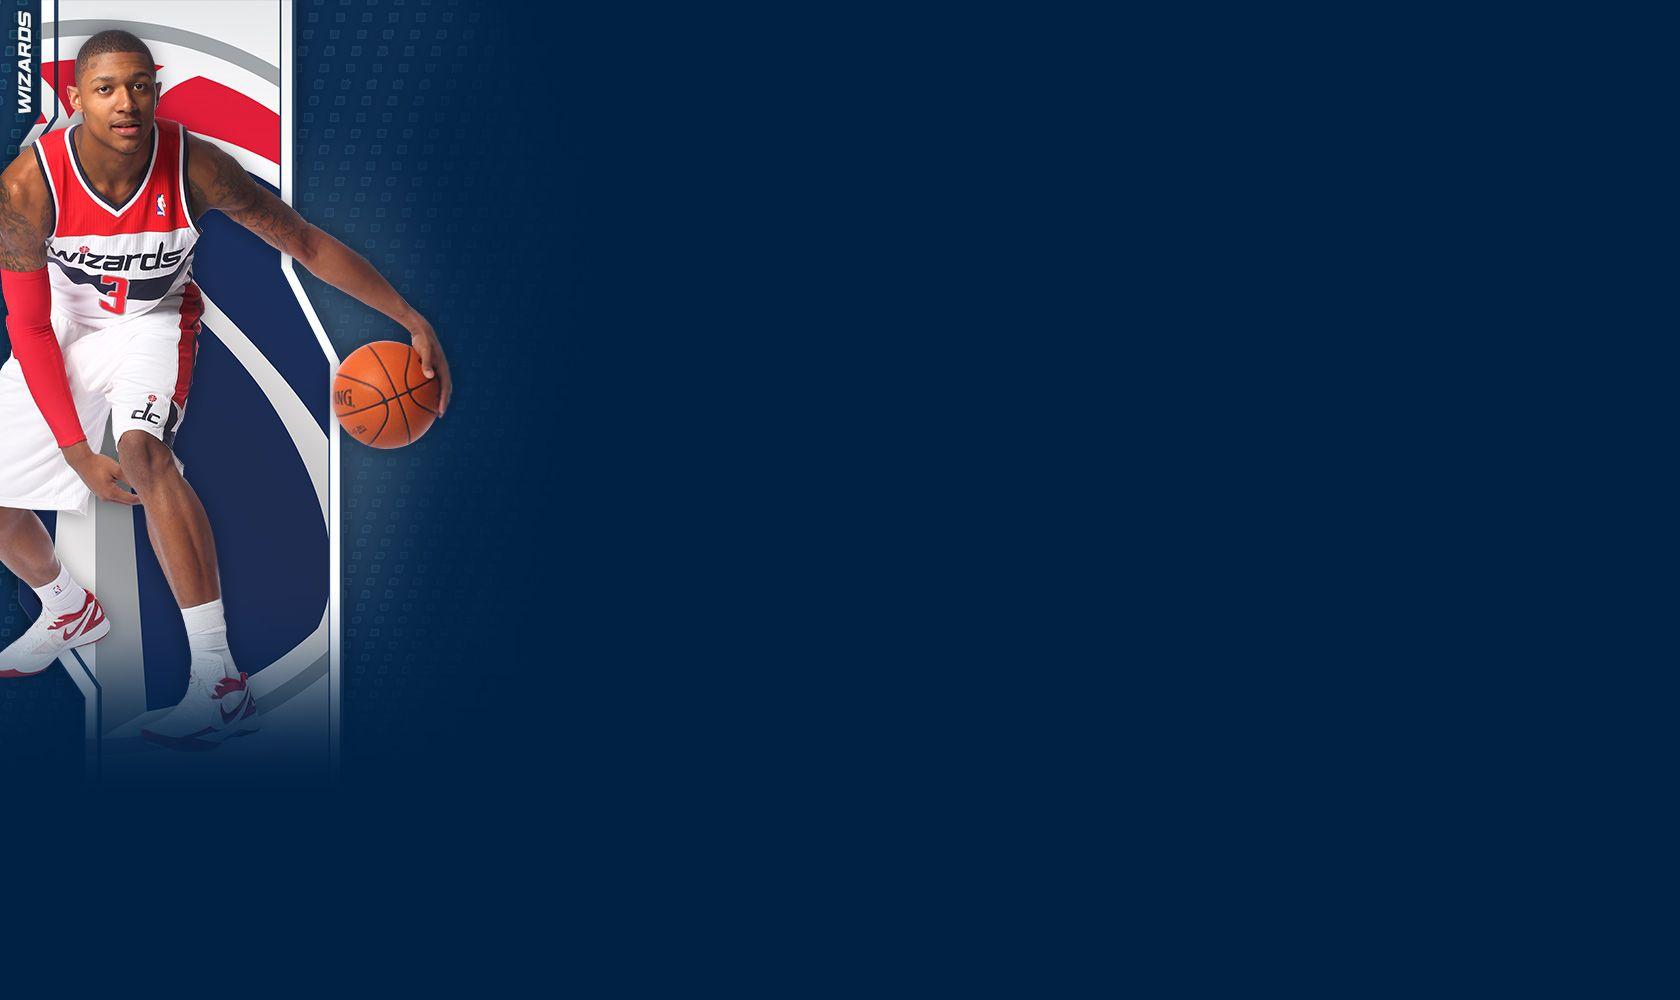 Wizards Twitter Background. THE OFFICIAL SITE OF THE WASHINGTON